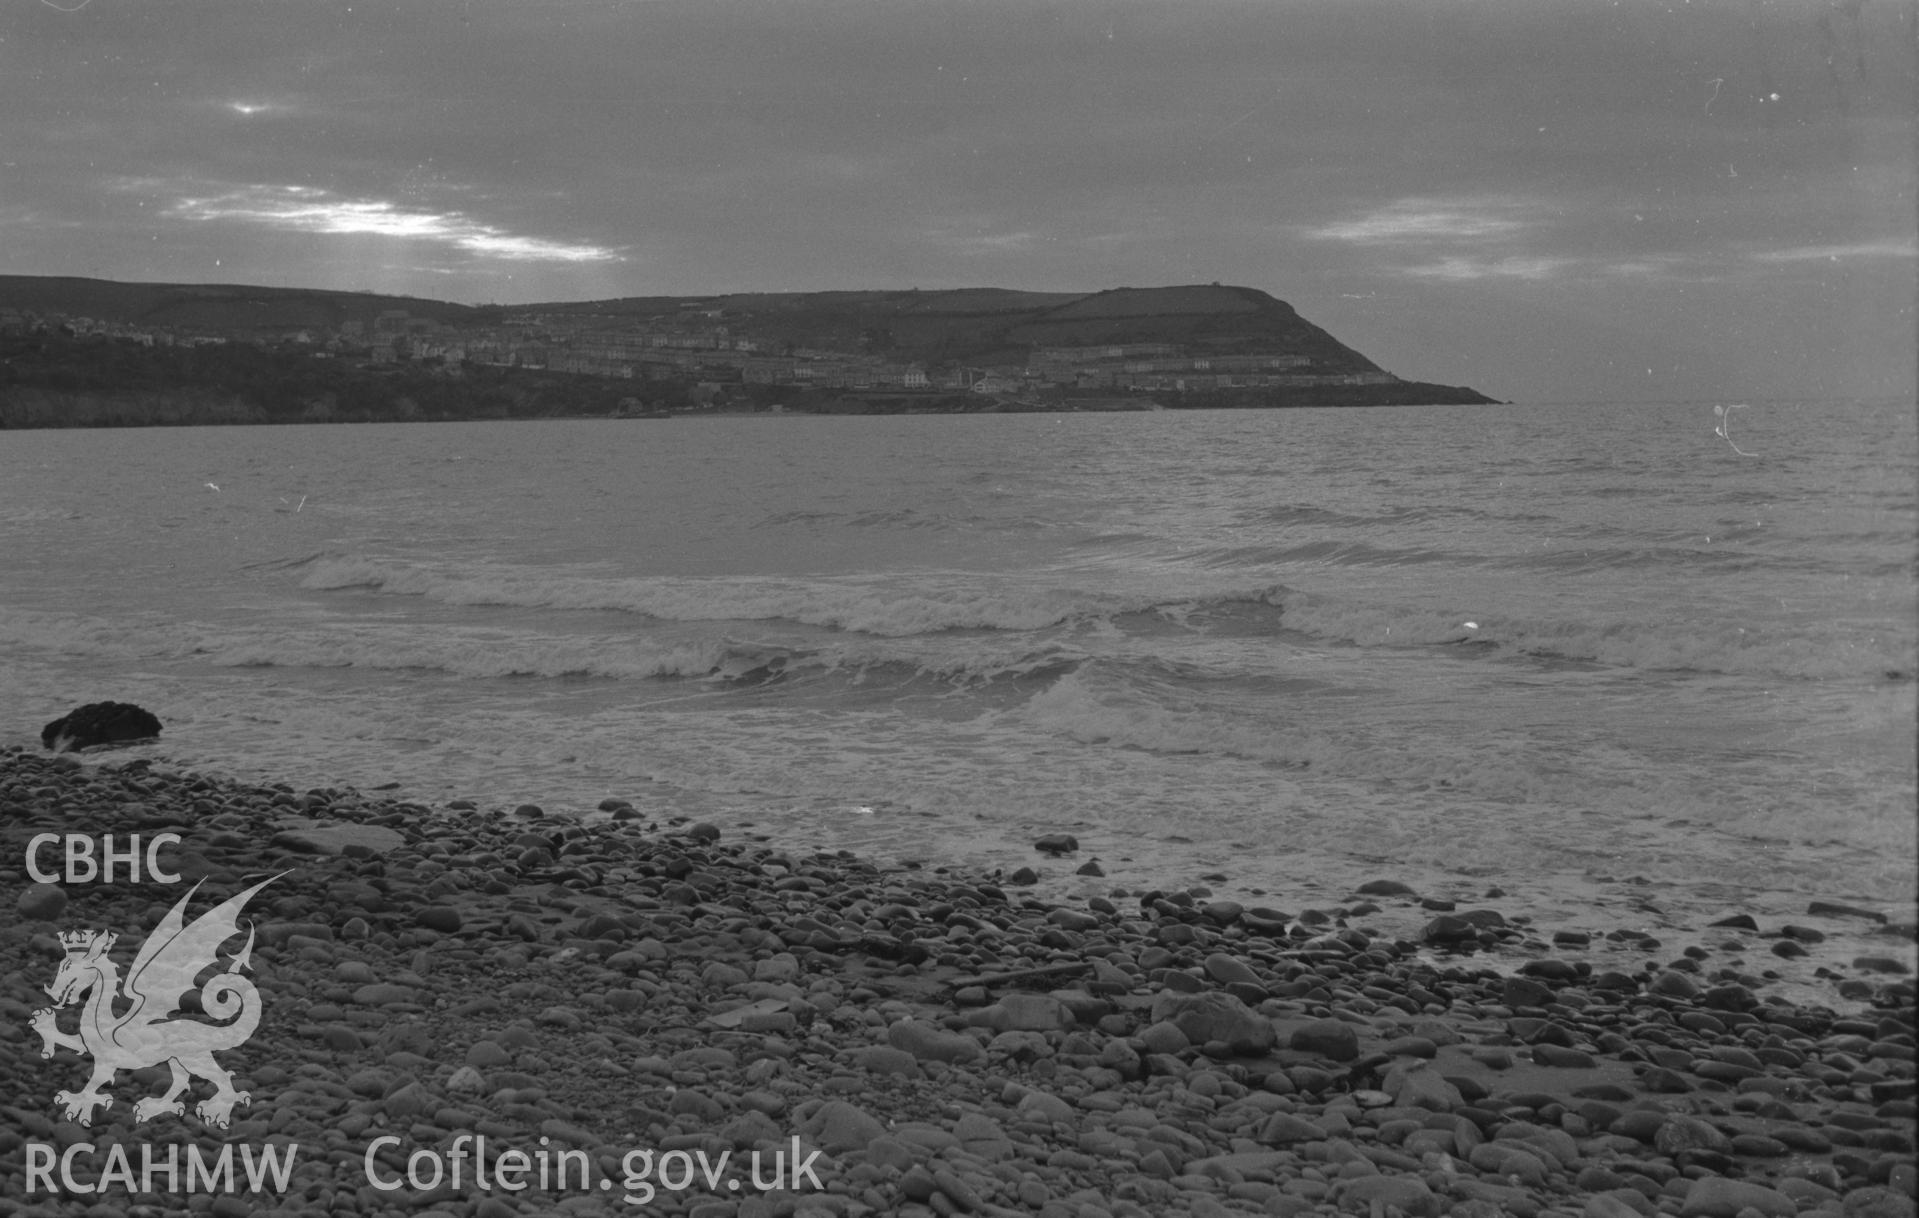 Black and White photograph showing distant view of New Quay Head from the beach at Llanina. Photographed by Arthur Chater in December 1961 from Grid Reference SN 404 599, looking west.